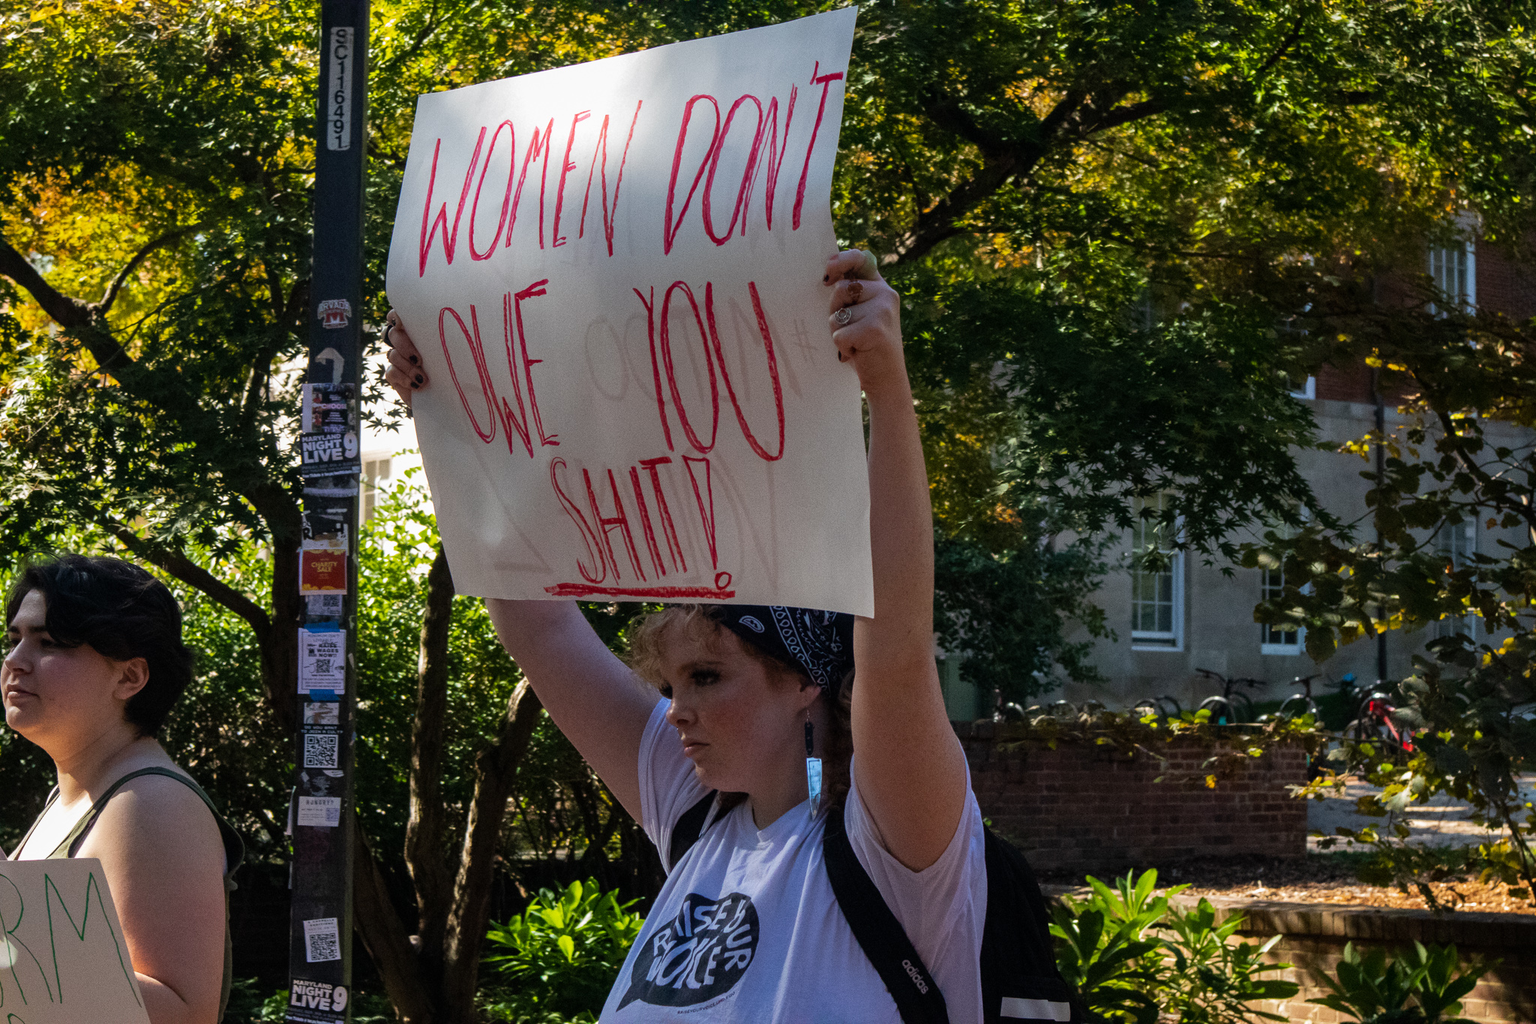 A woman holds up a sign at a protest